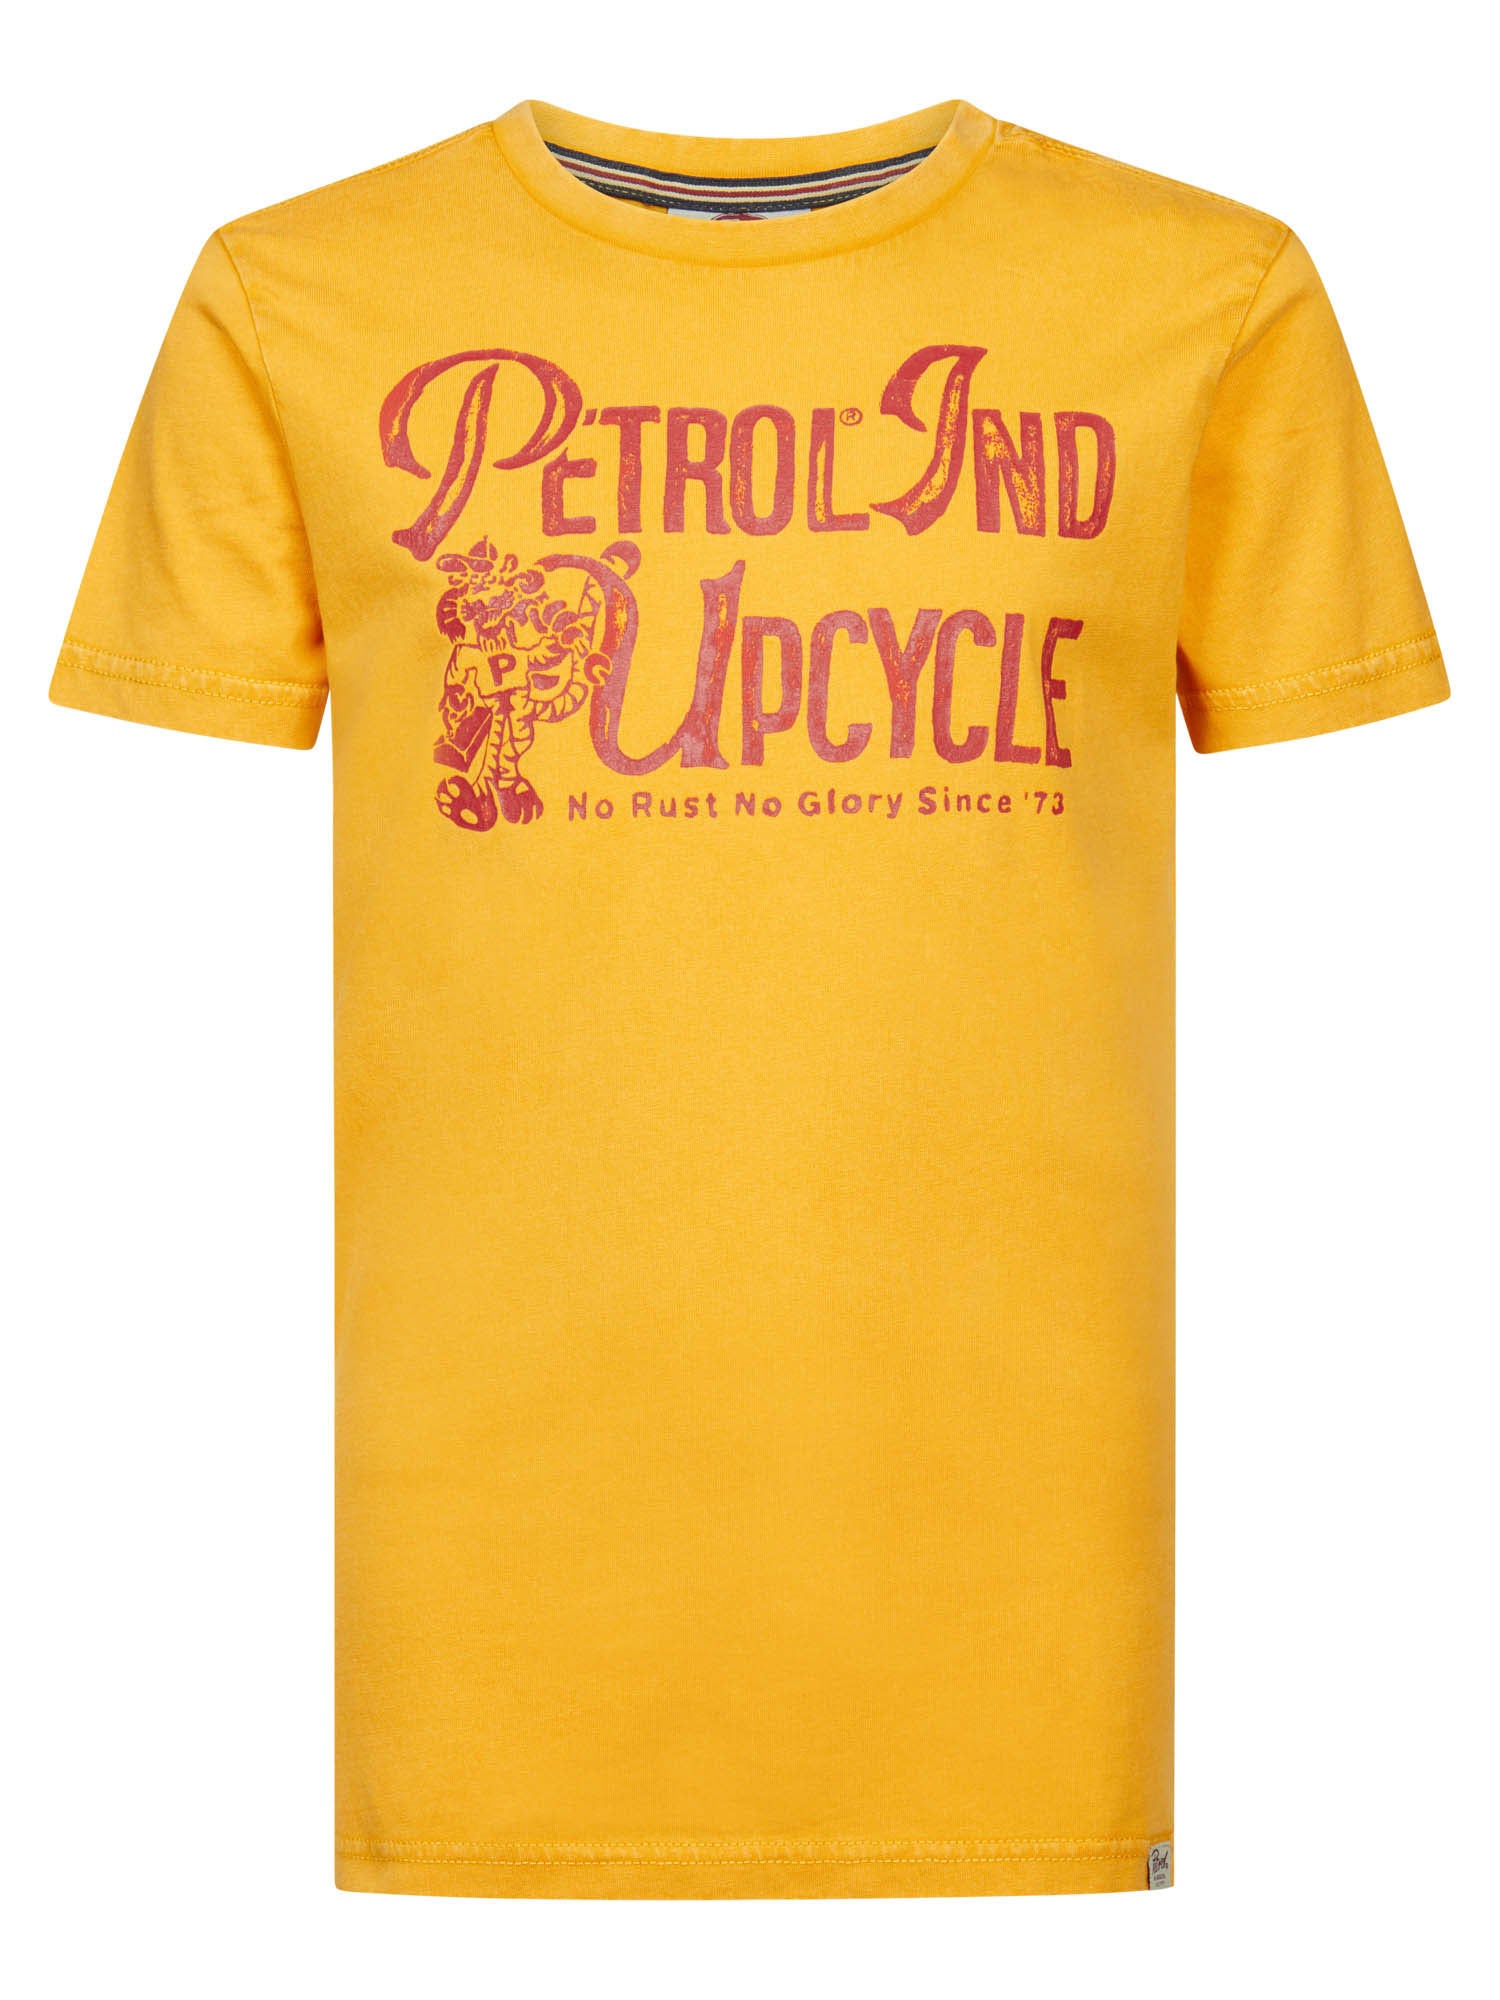 Upcycle T-Shirt | Official Petrol Industries® webshop